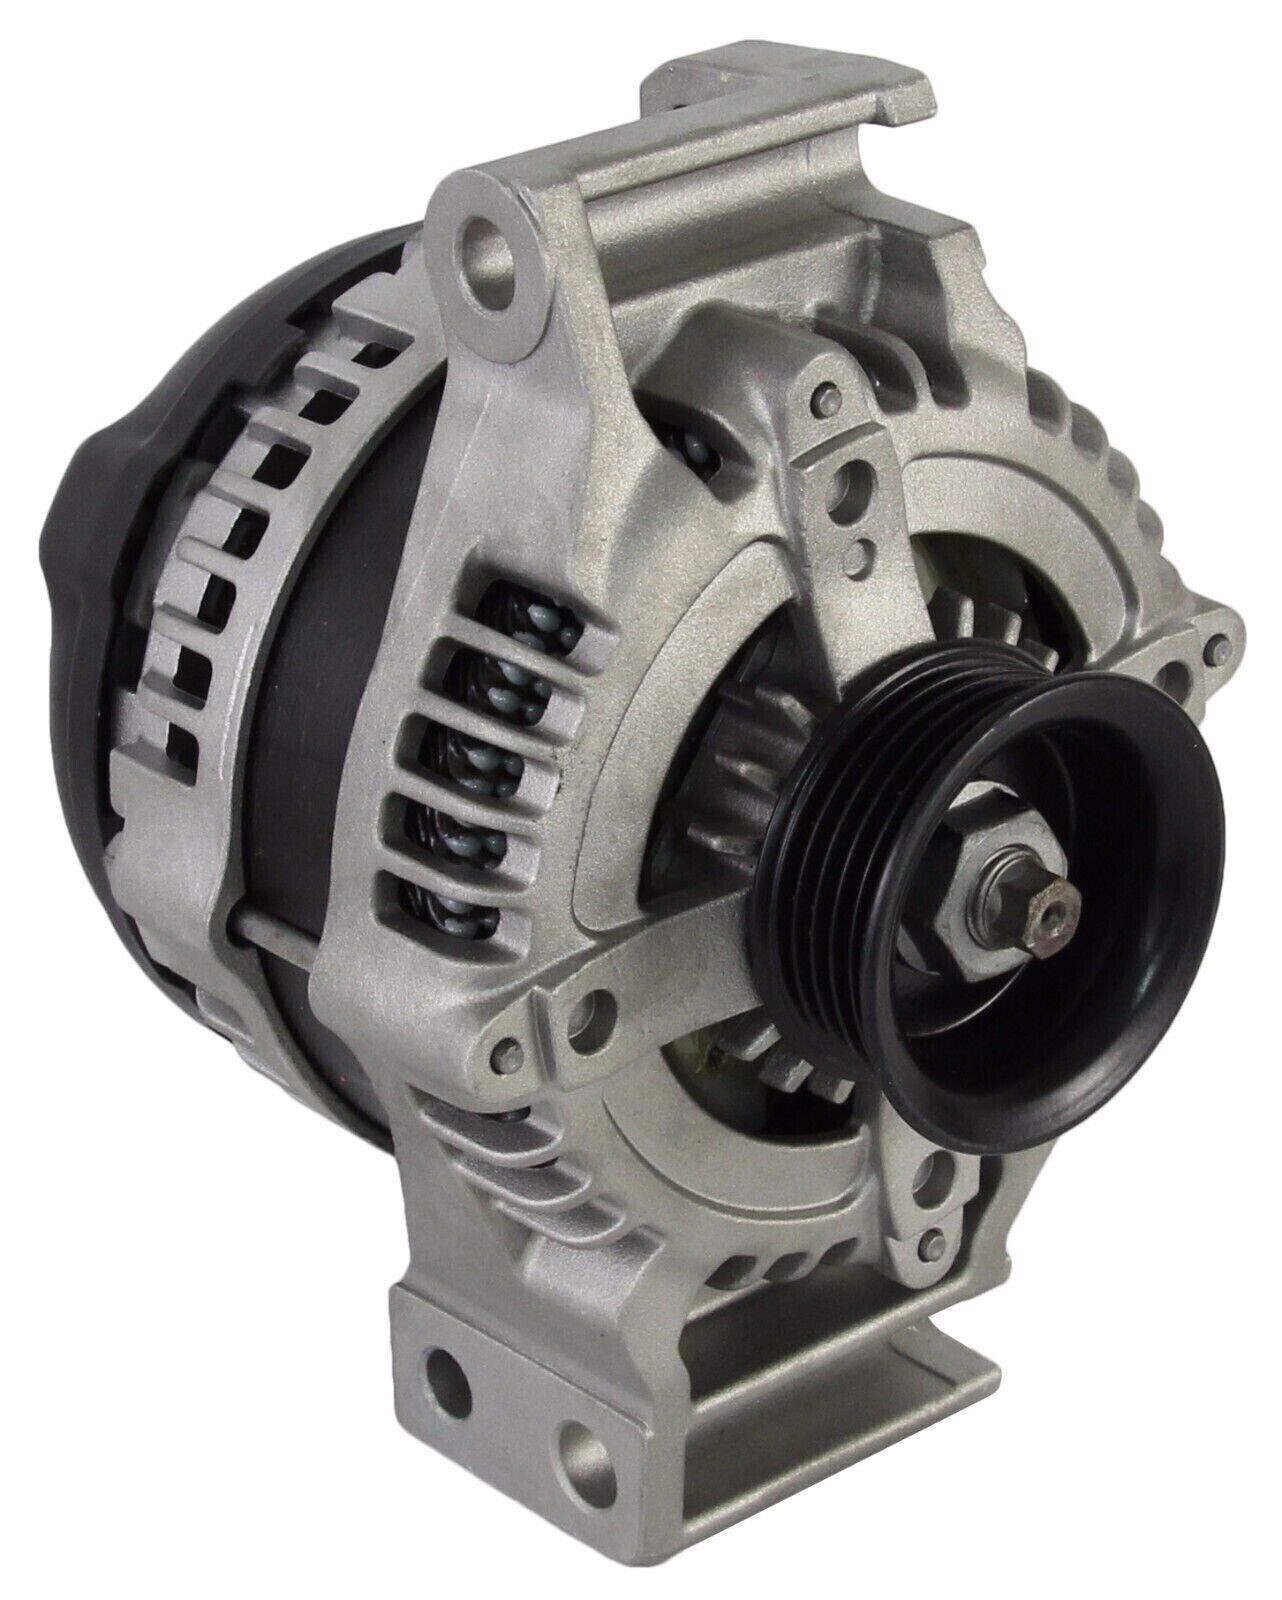 New Alternator For Cadillac CTS V6 3.6L 08-09 10396863 104210-5390 AND0487 12846